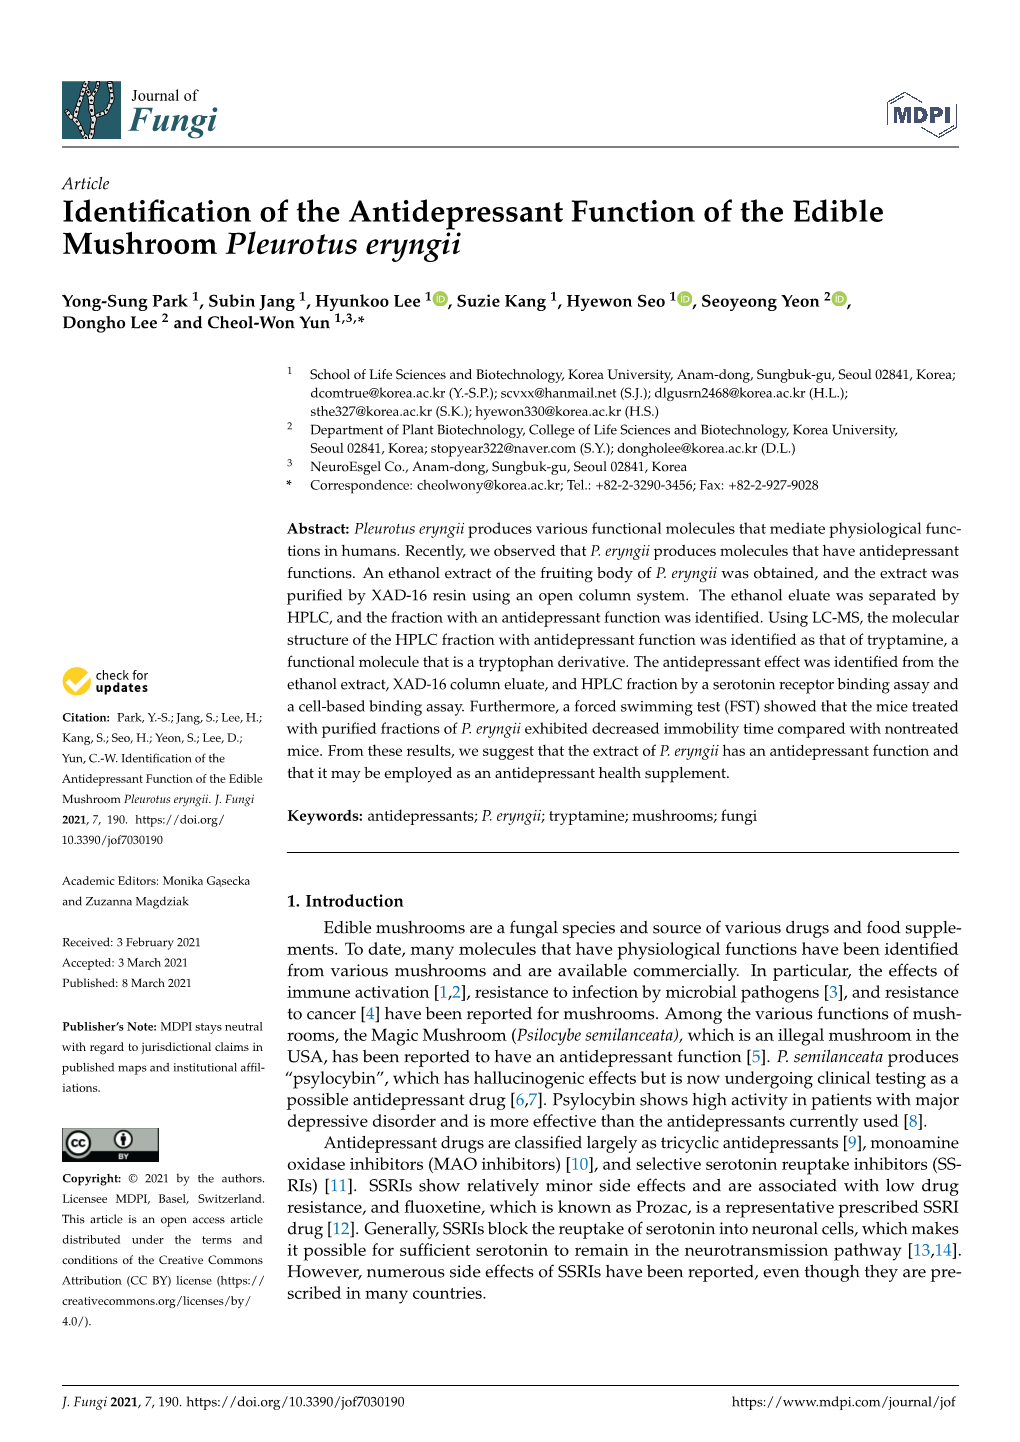 Identification of the Antidepressant Function of the Edible Mushroom